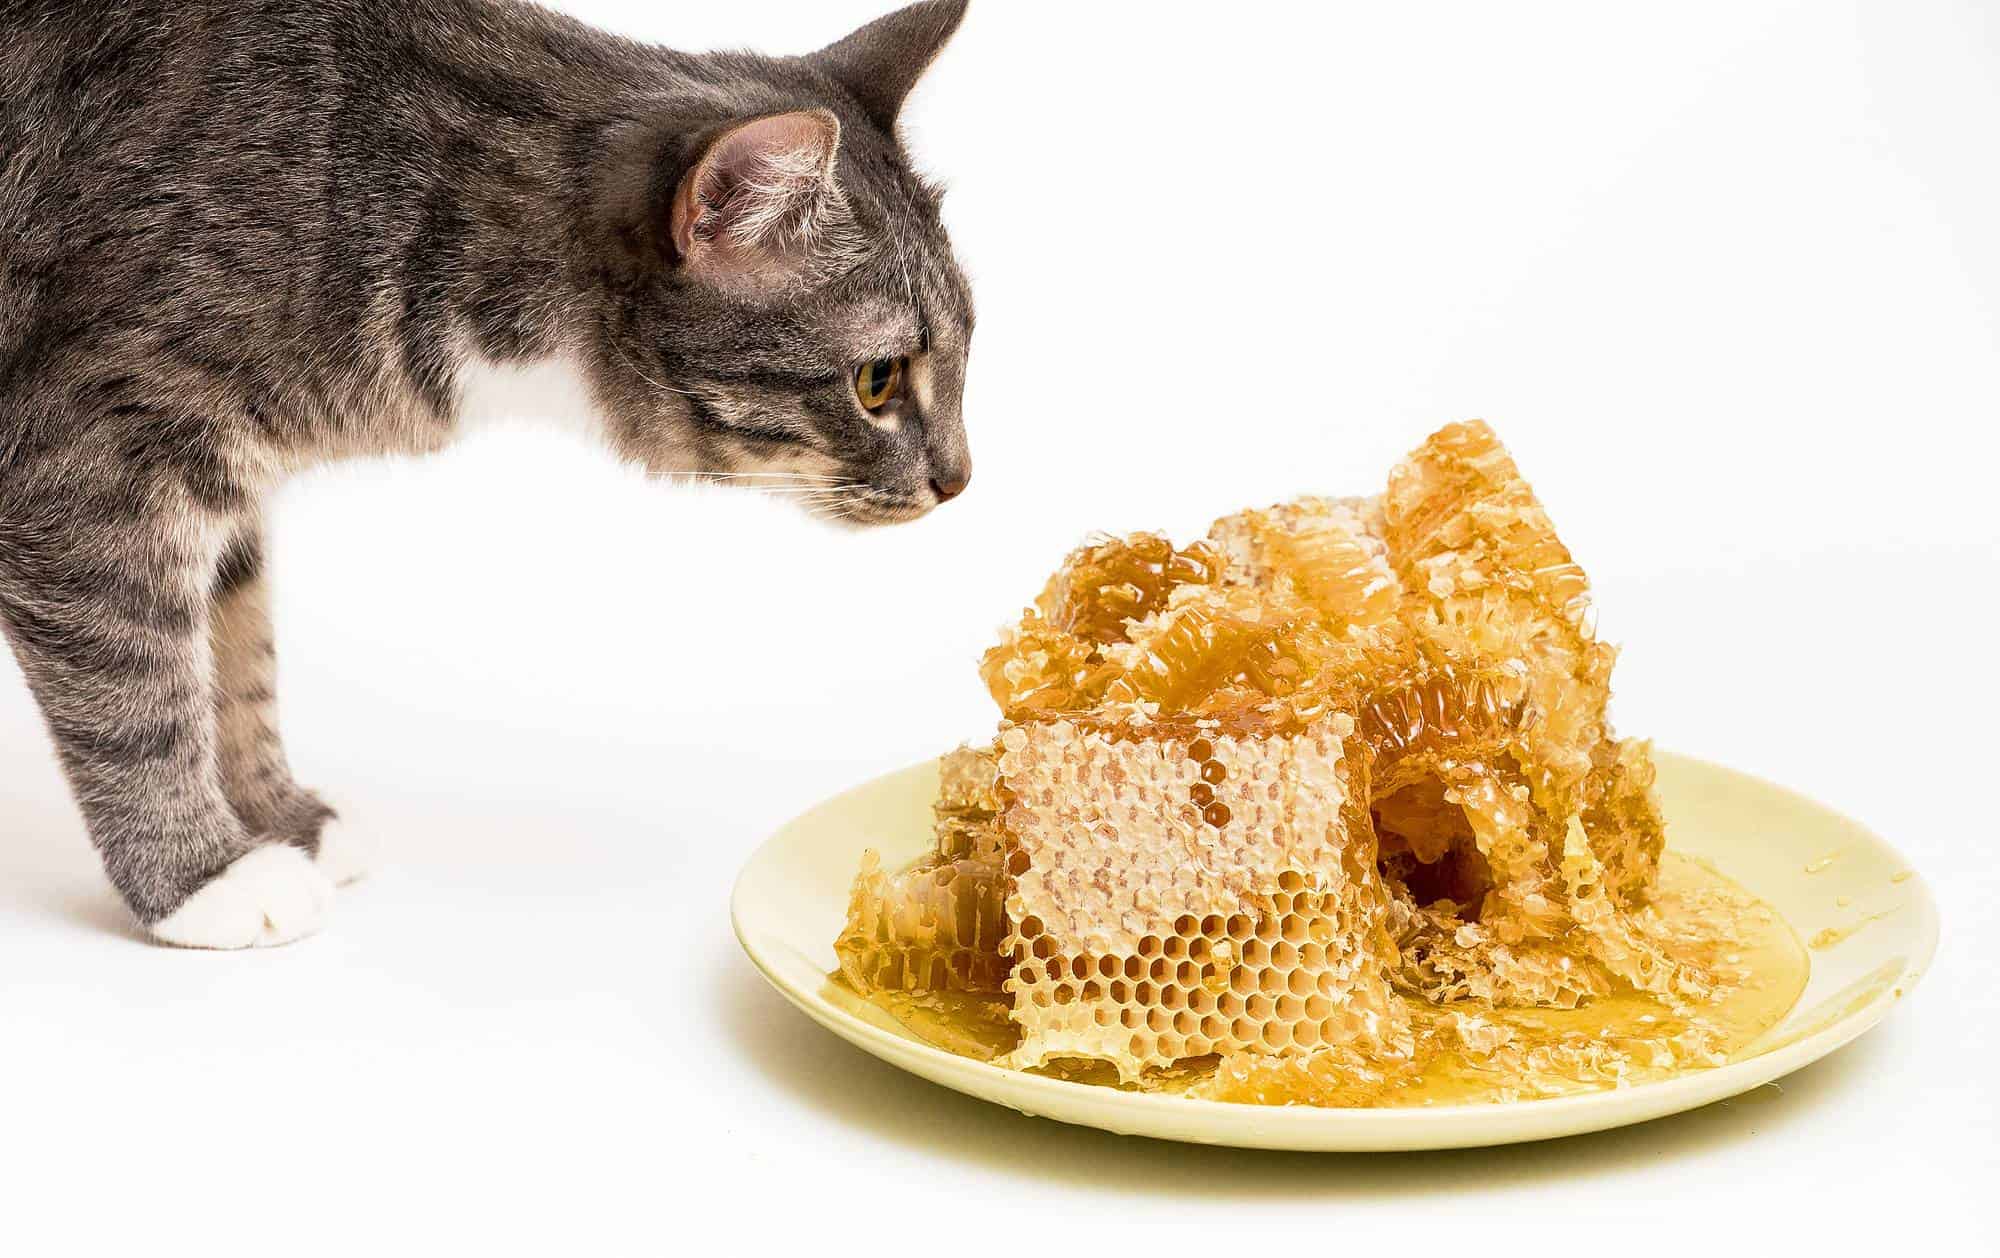 Cats and Beeswax: What You Need To Know